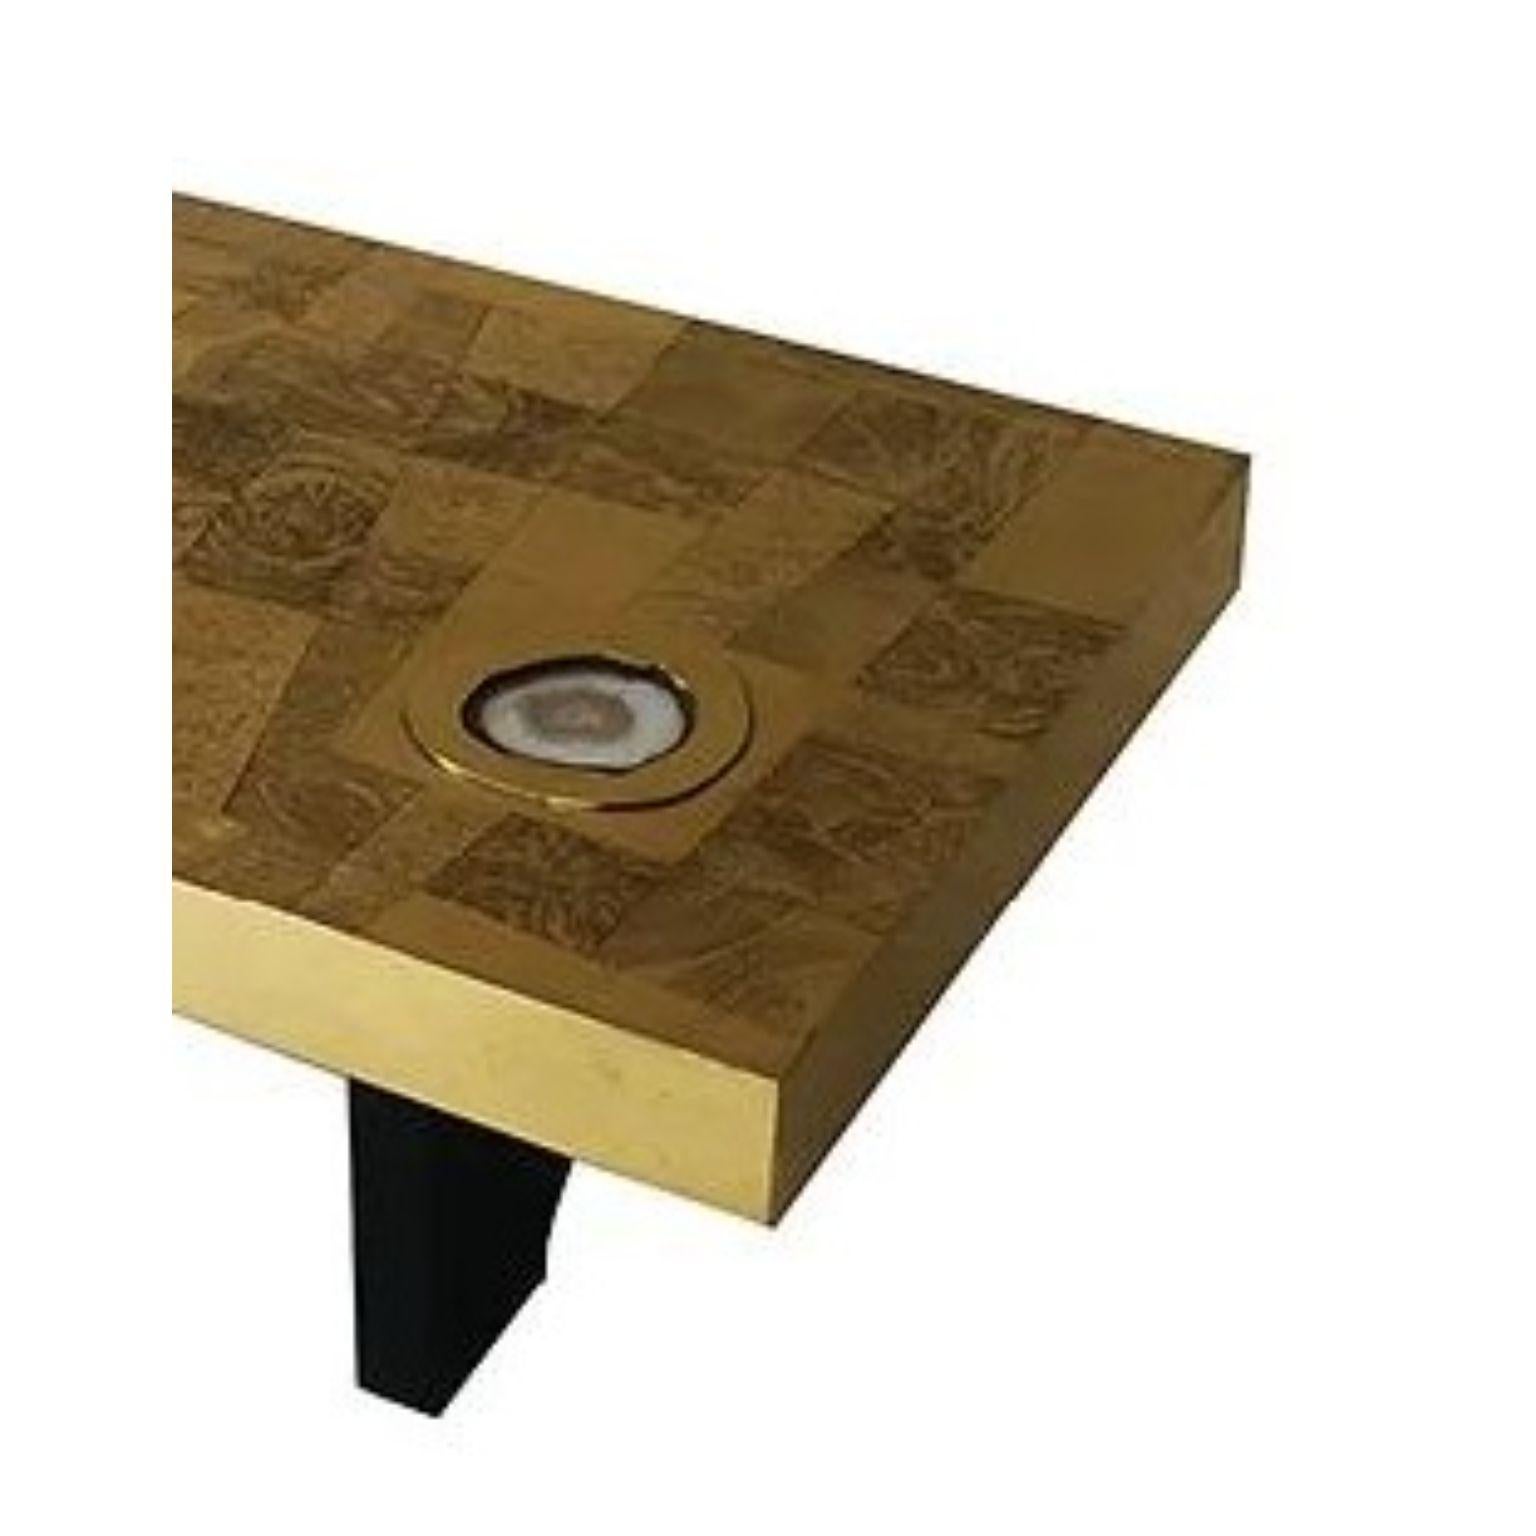 Small Straight 1 Stone And Brass Coffee Table by Brutalist Be
One Of A Kind
Dimensions: D 58 x W 97 x H 35 cm.
Materials: Brass and agate stone.

A moon surface inspired pattern combined in squares with a rare agate stone inlay. 

Also available in